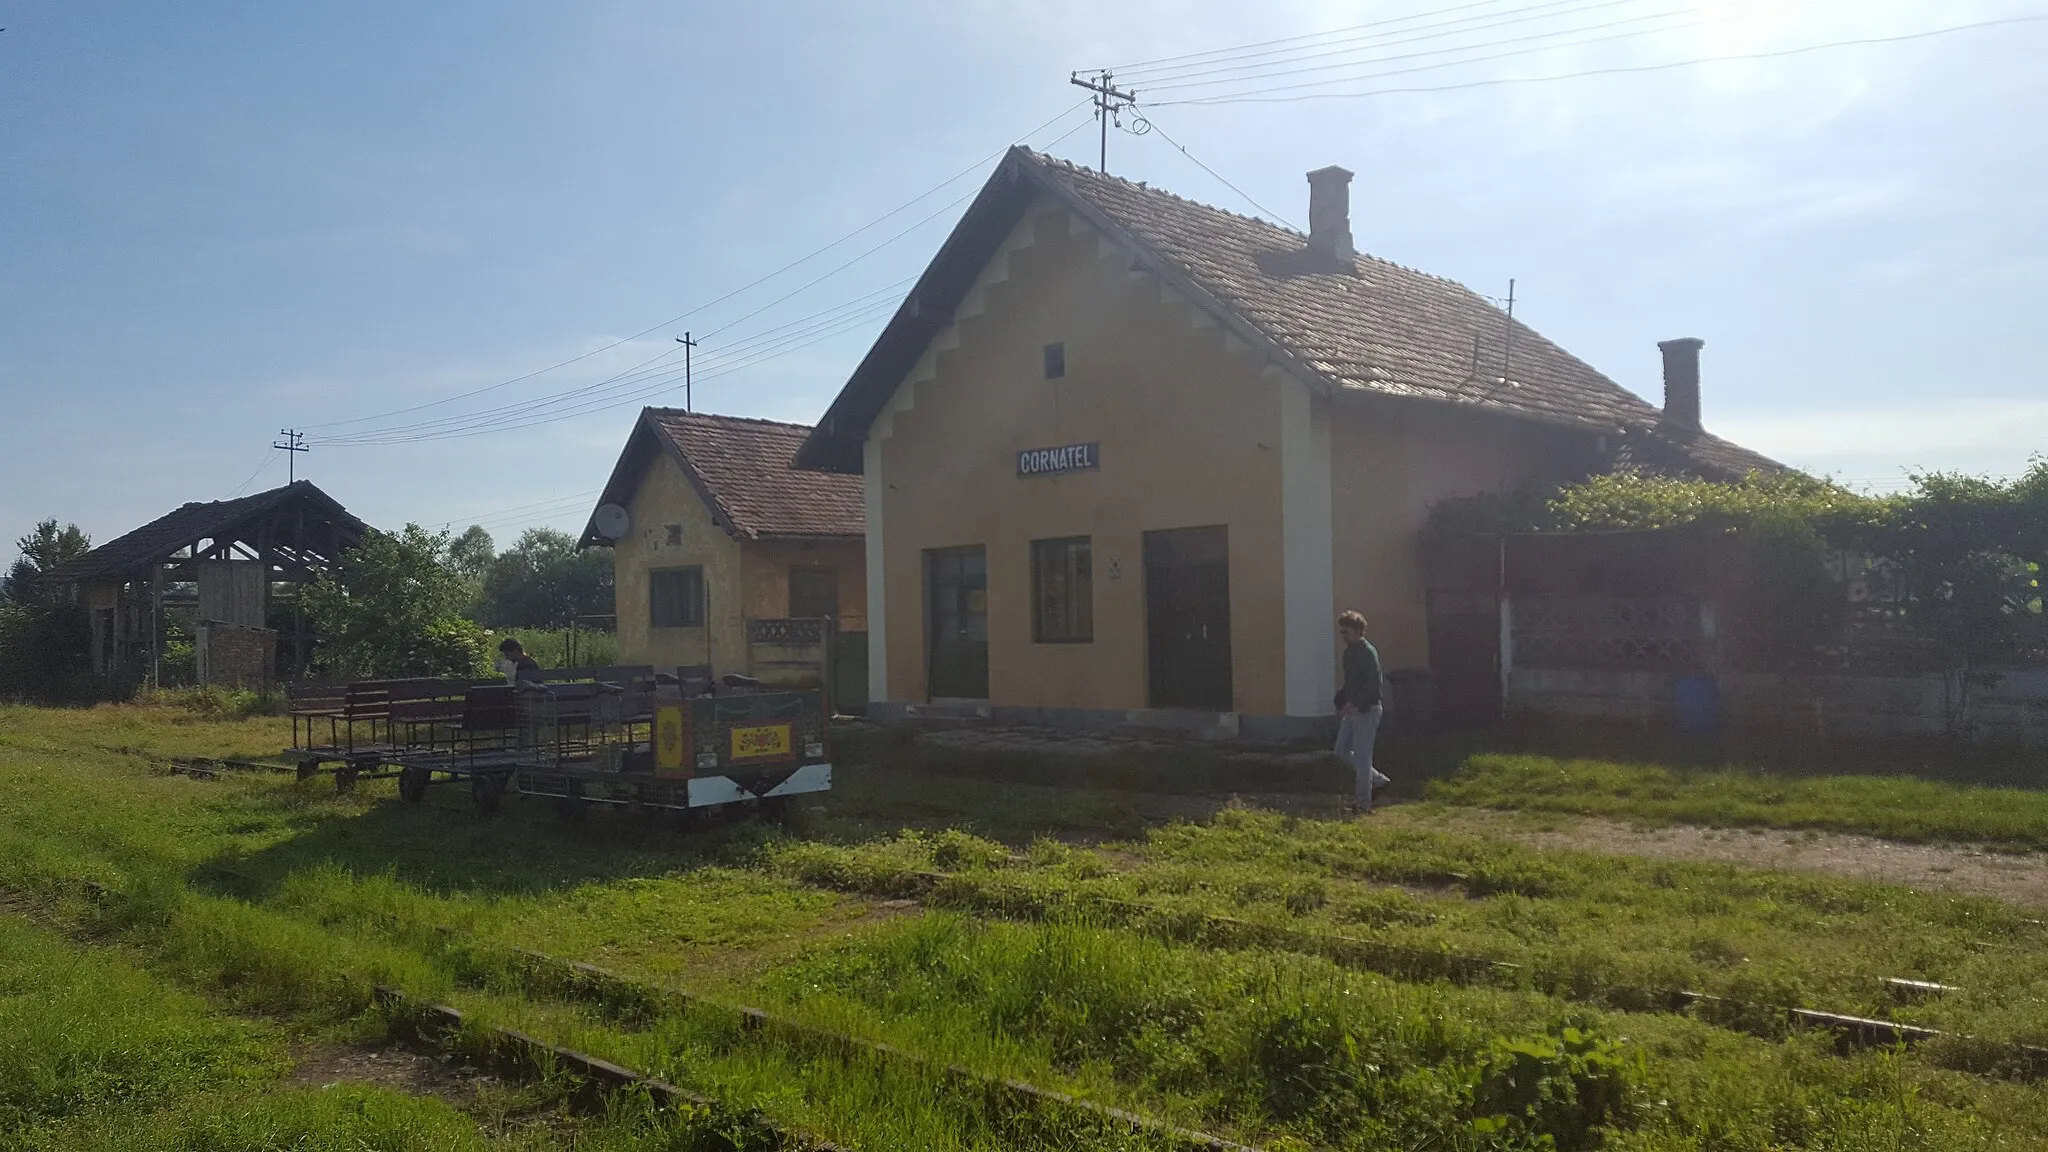 Photo showing: A former train station in Cornățel, Romania, presently a starting point for tourist draisine rides.